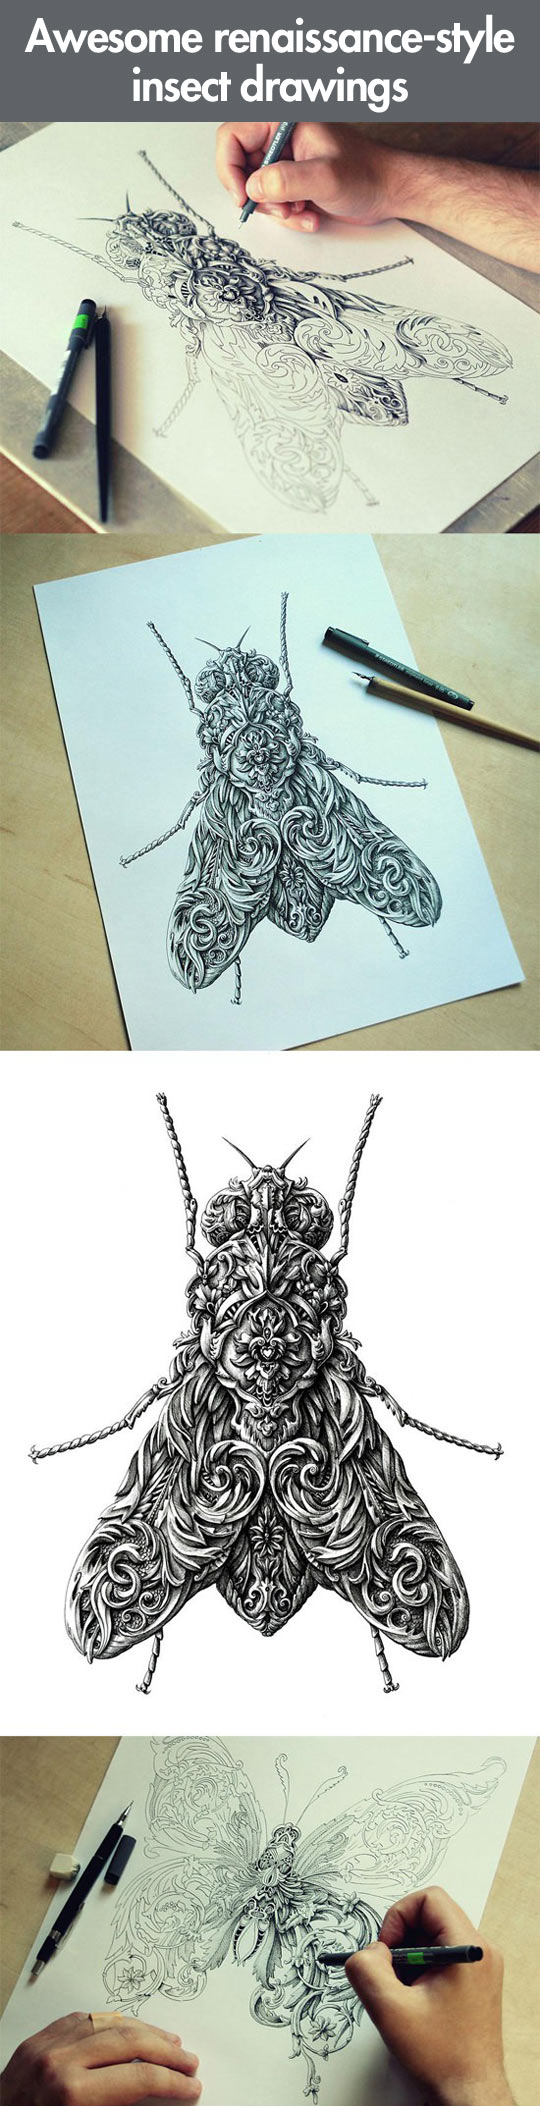 Renaissance-style insect drawings...